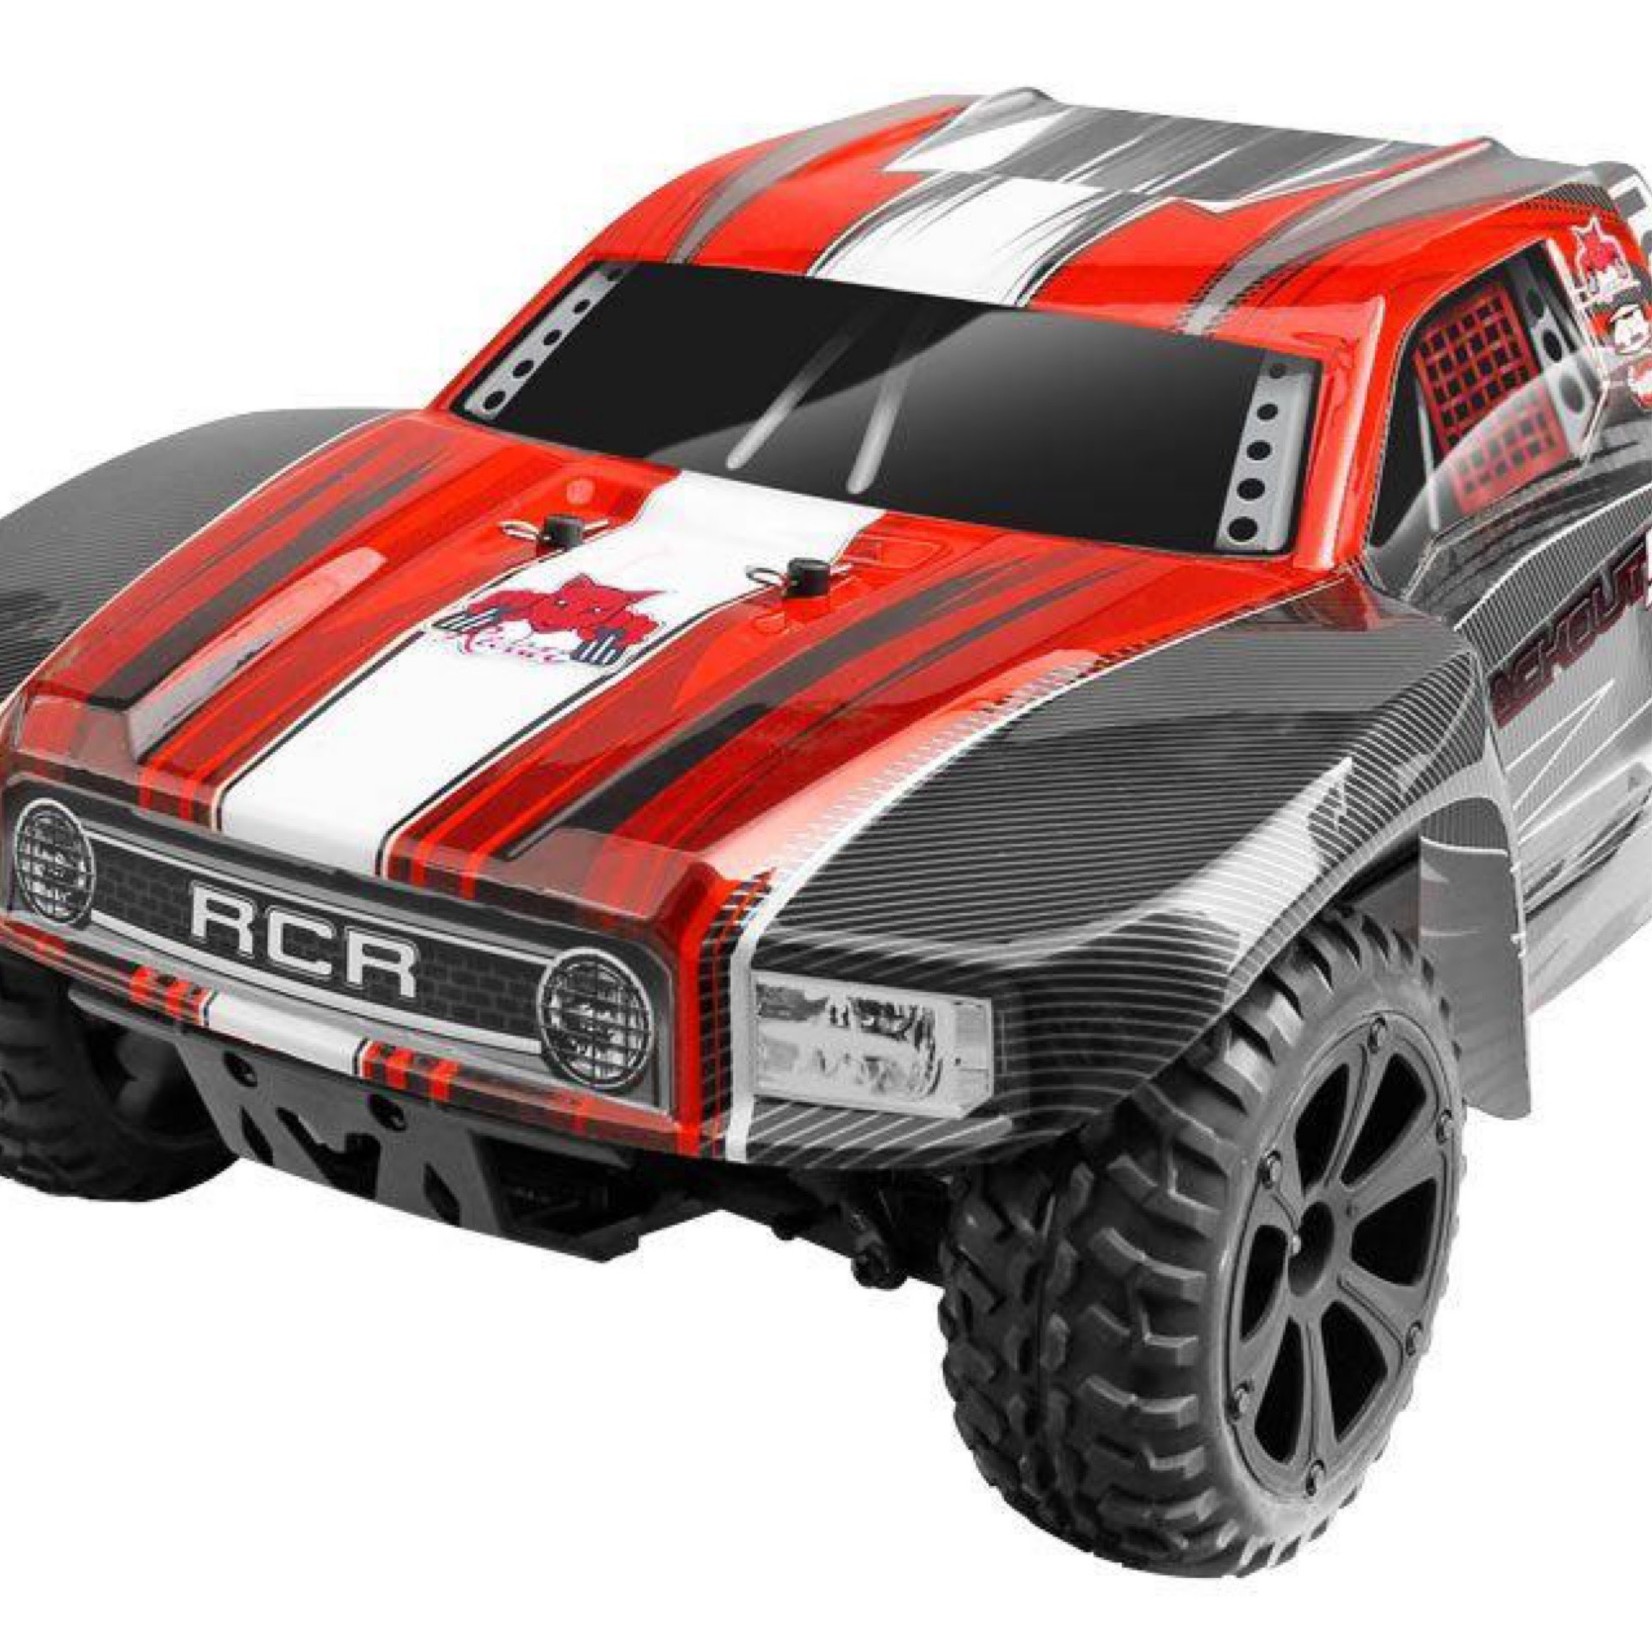 Redcat Racing Redcat Racing - Blackout SC 1/10 Scale Electric Short Course Truck RTR, Red  #RER07115